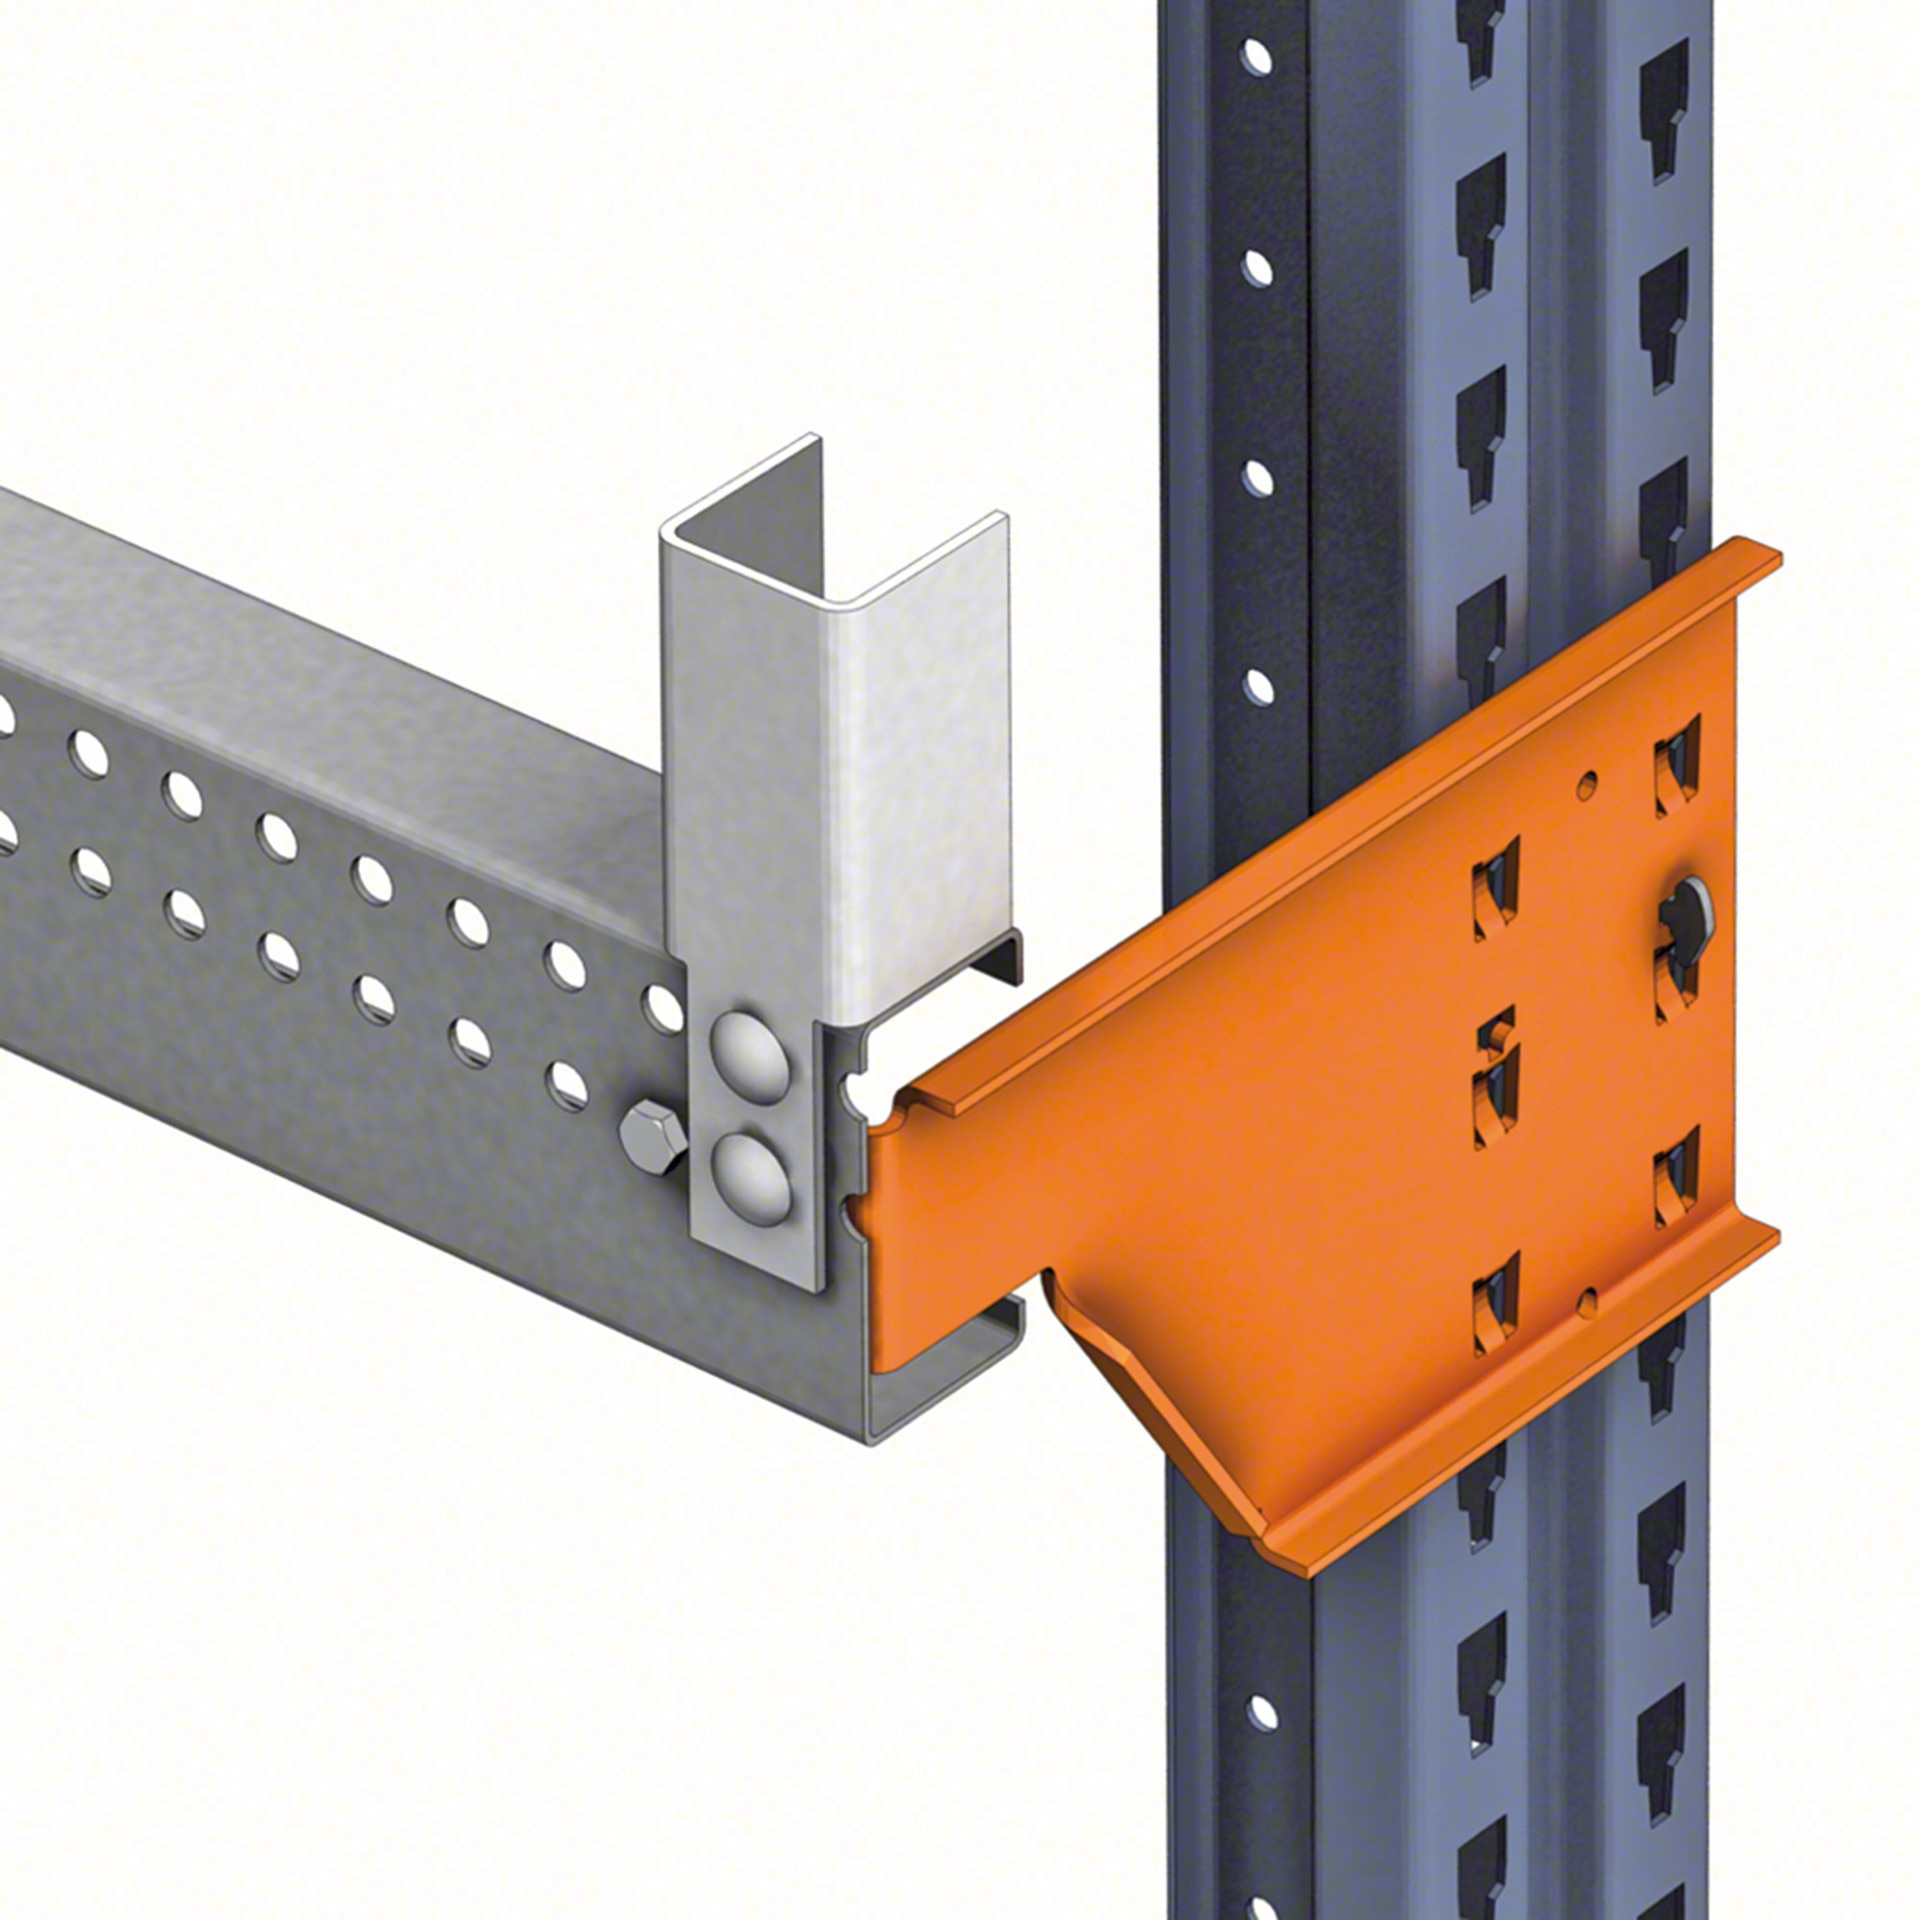 The C brackets are specifically for installations where a long goods need storing